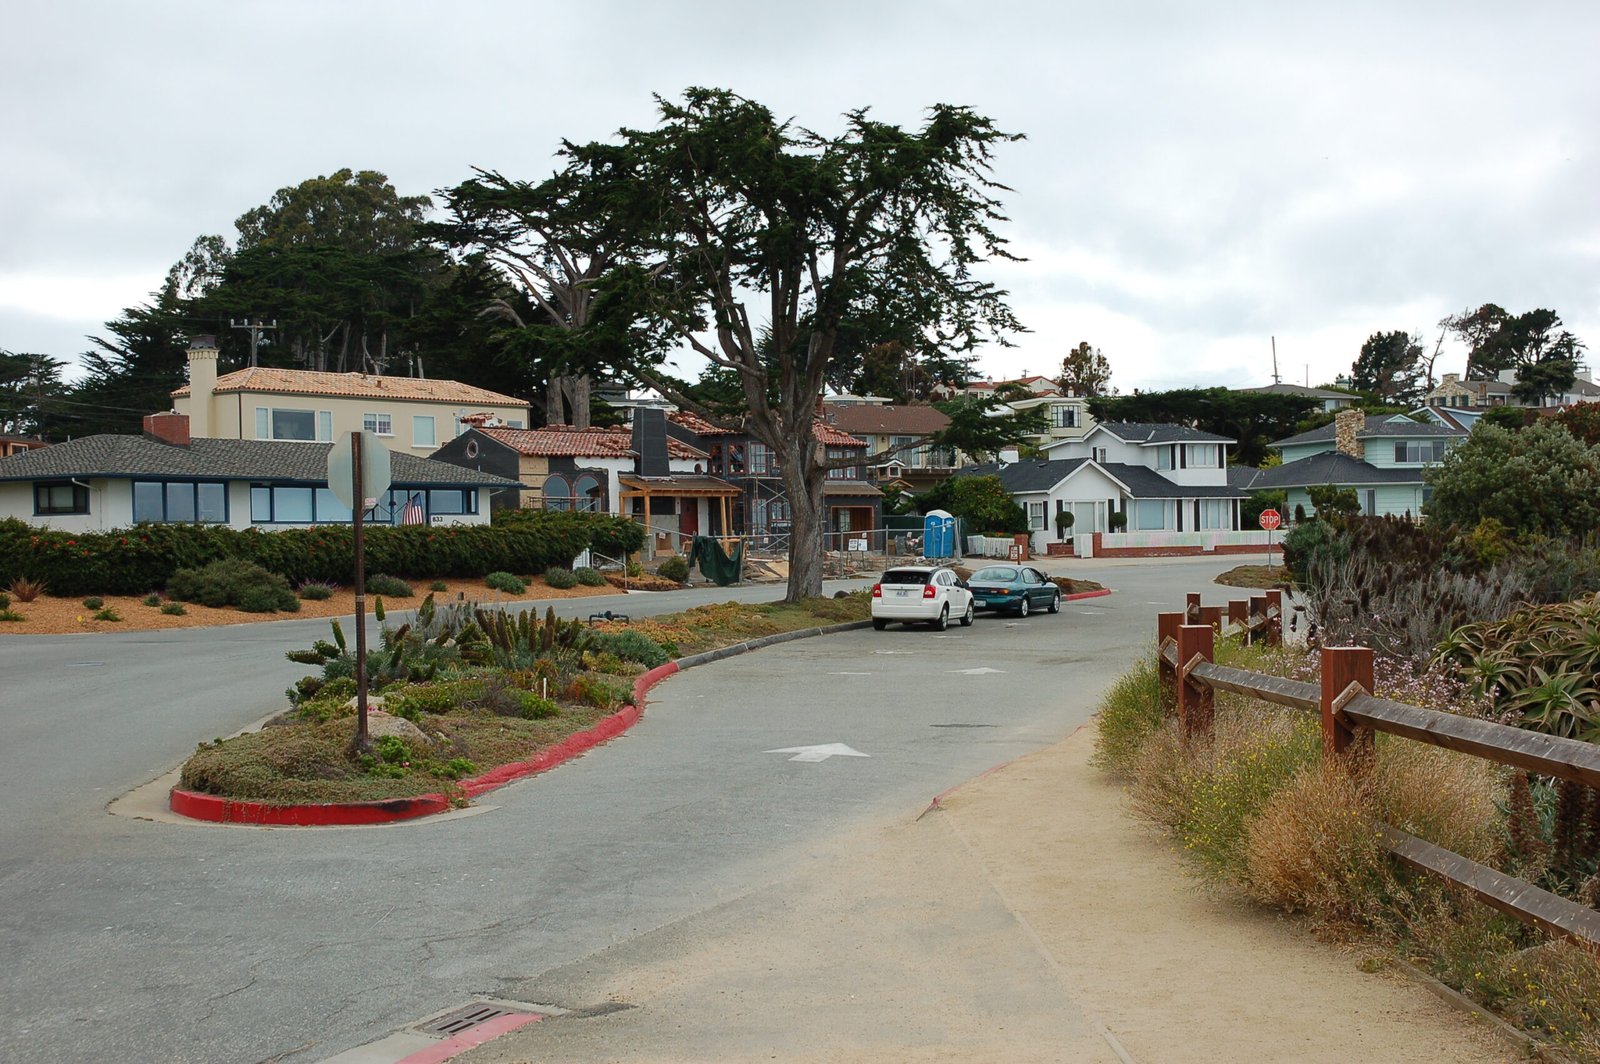 Otter Cove parking